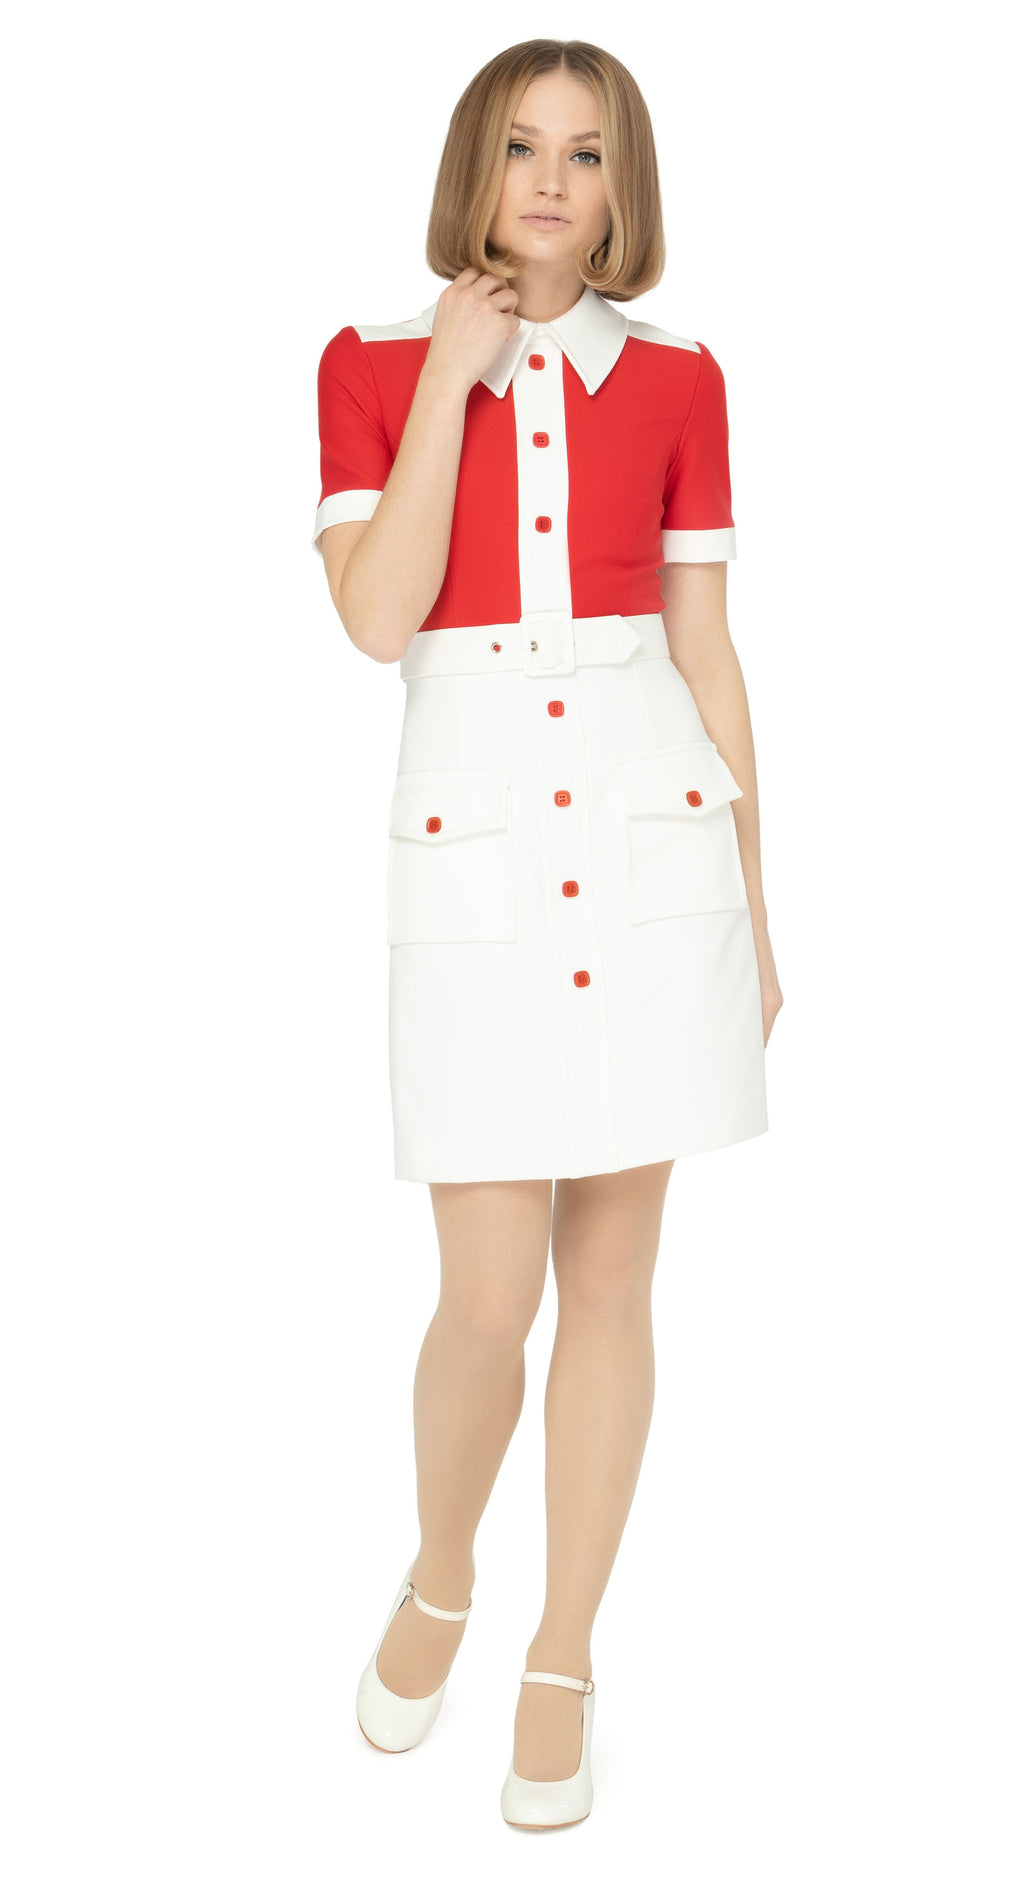 Spring, sixties cut dress with a fitted silhouette, featuring a striking contrast of red and white. It has a white skirt, collar, cuffs, and shoulder detailing on a bright red torso, with matching red petite buttons and essentials skirt pockets. This dress includes a detachable matching belt.